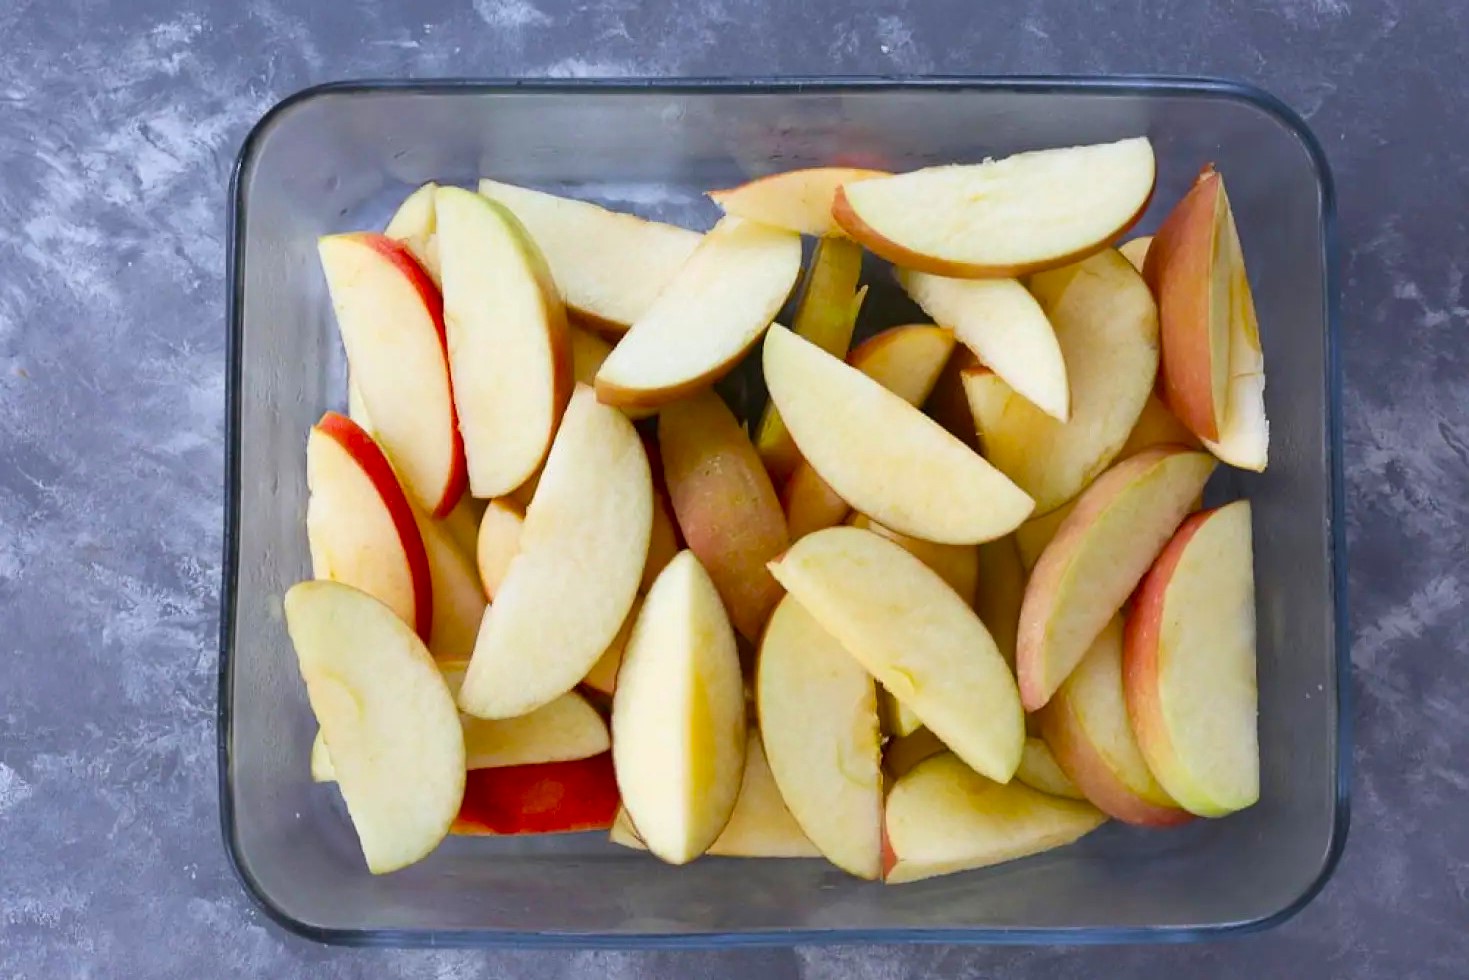 How To Store Peeled Apples Overnight